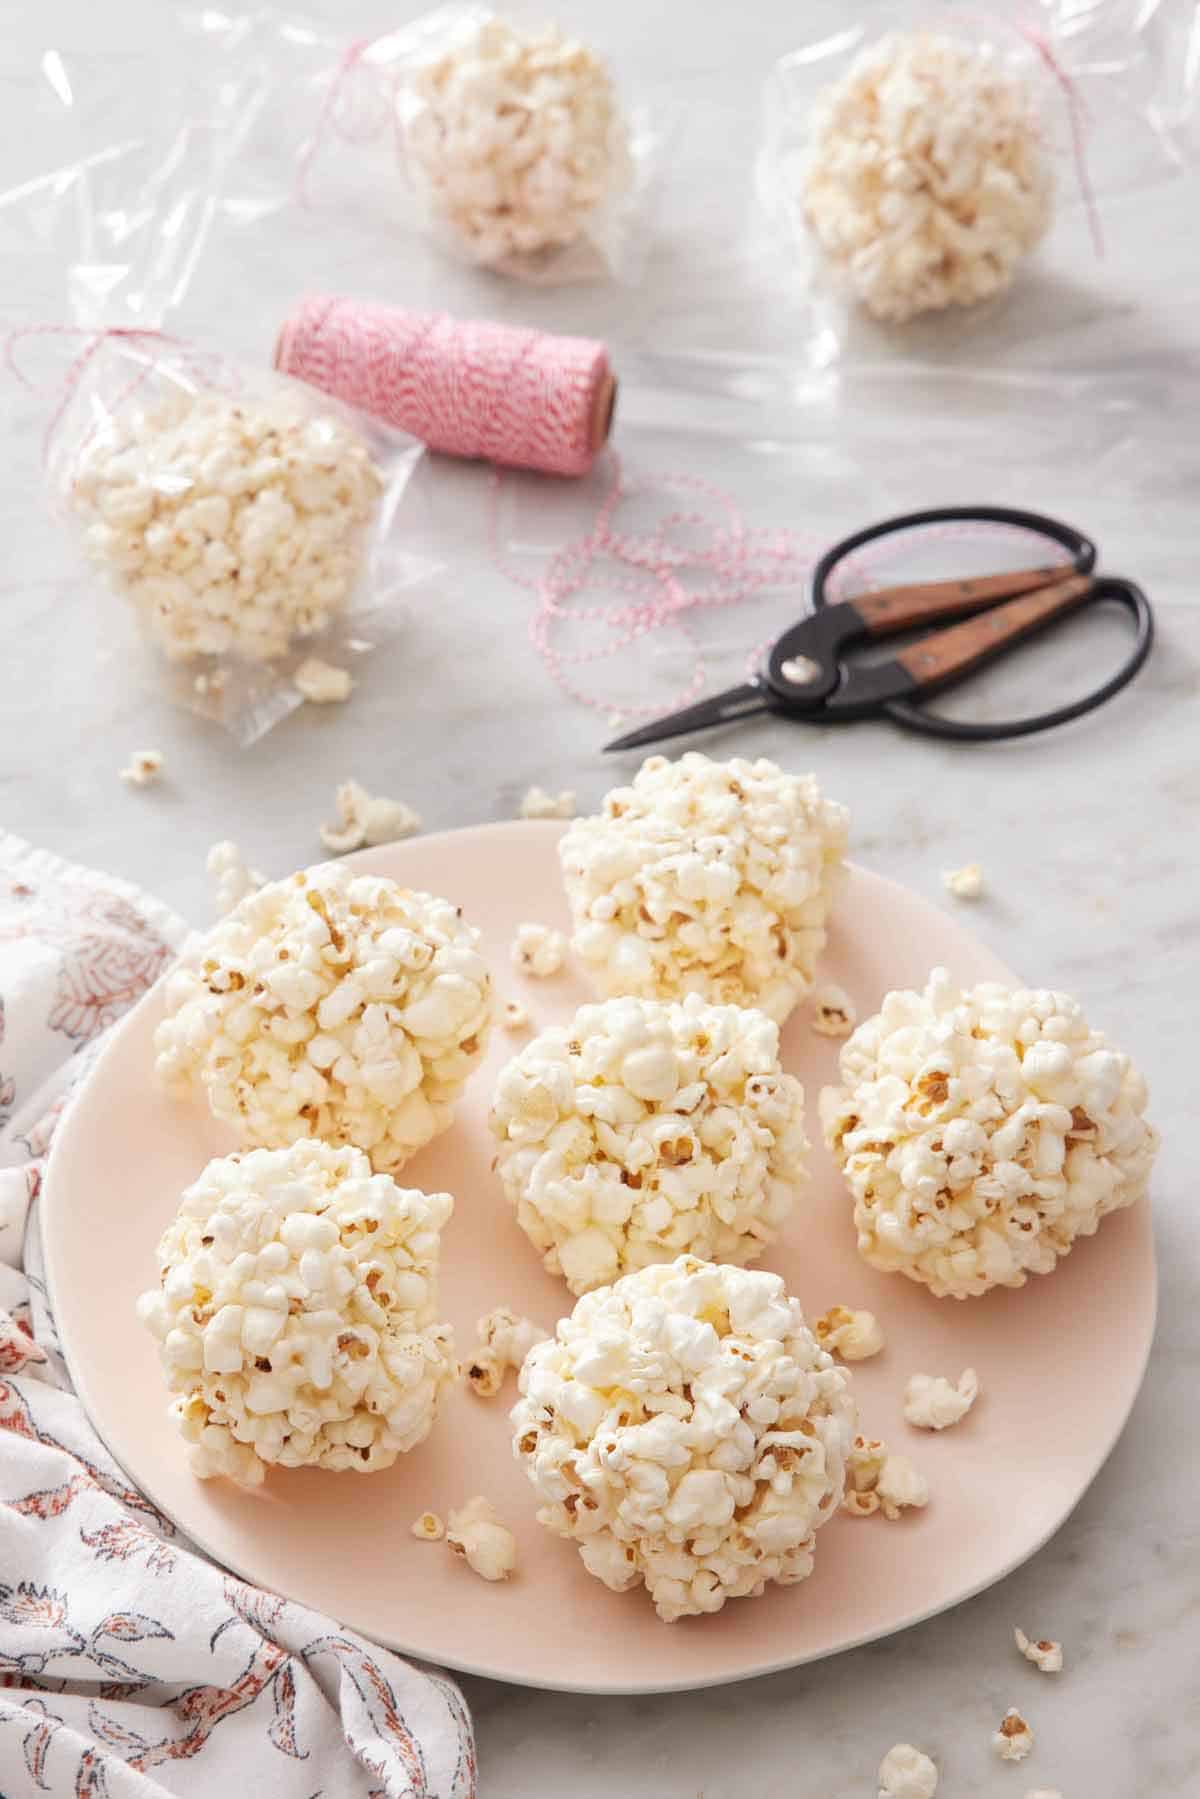 A plate with six popcorn balls. Three packaged popcorn balls in the background with a roll of twine and scissors.